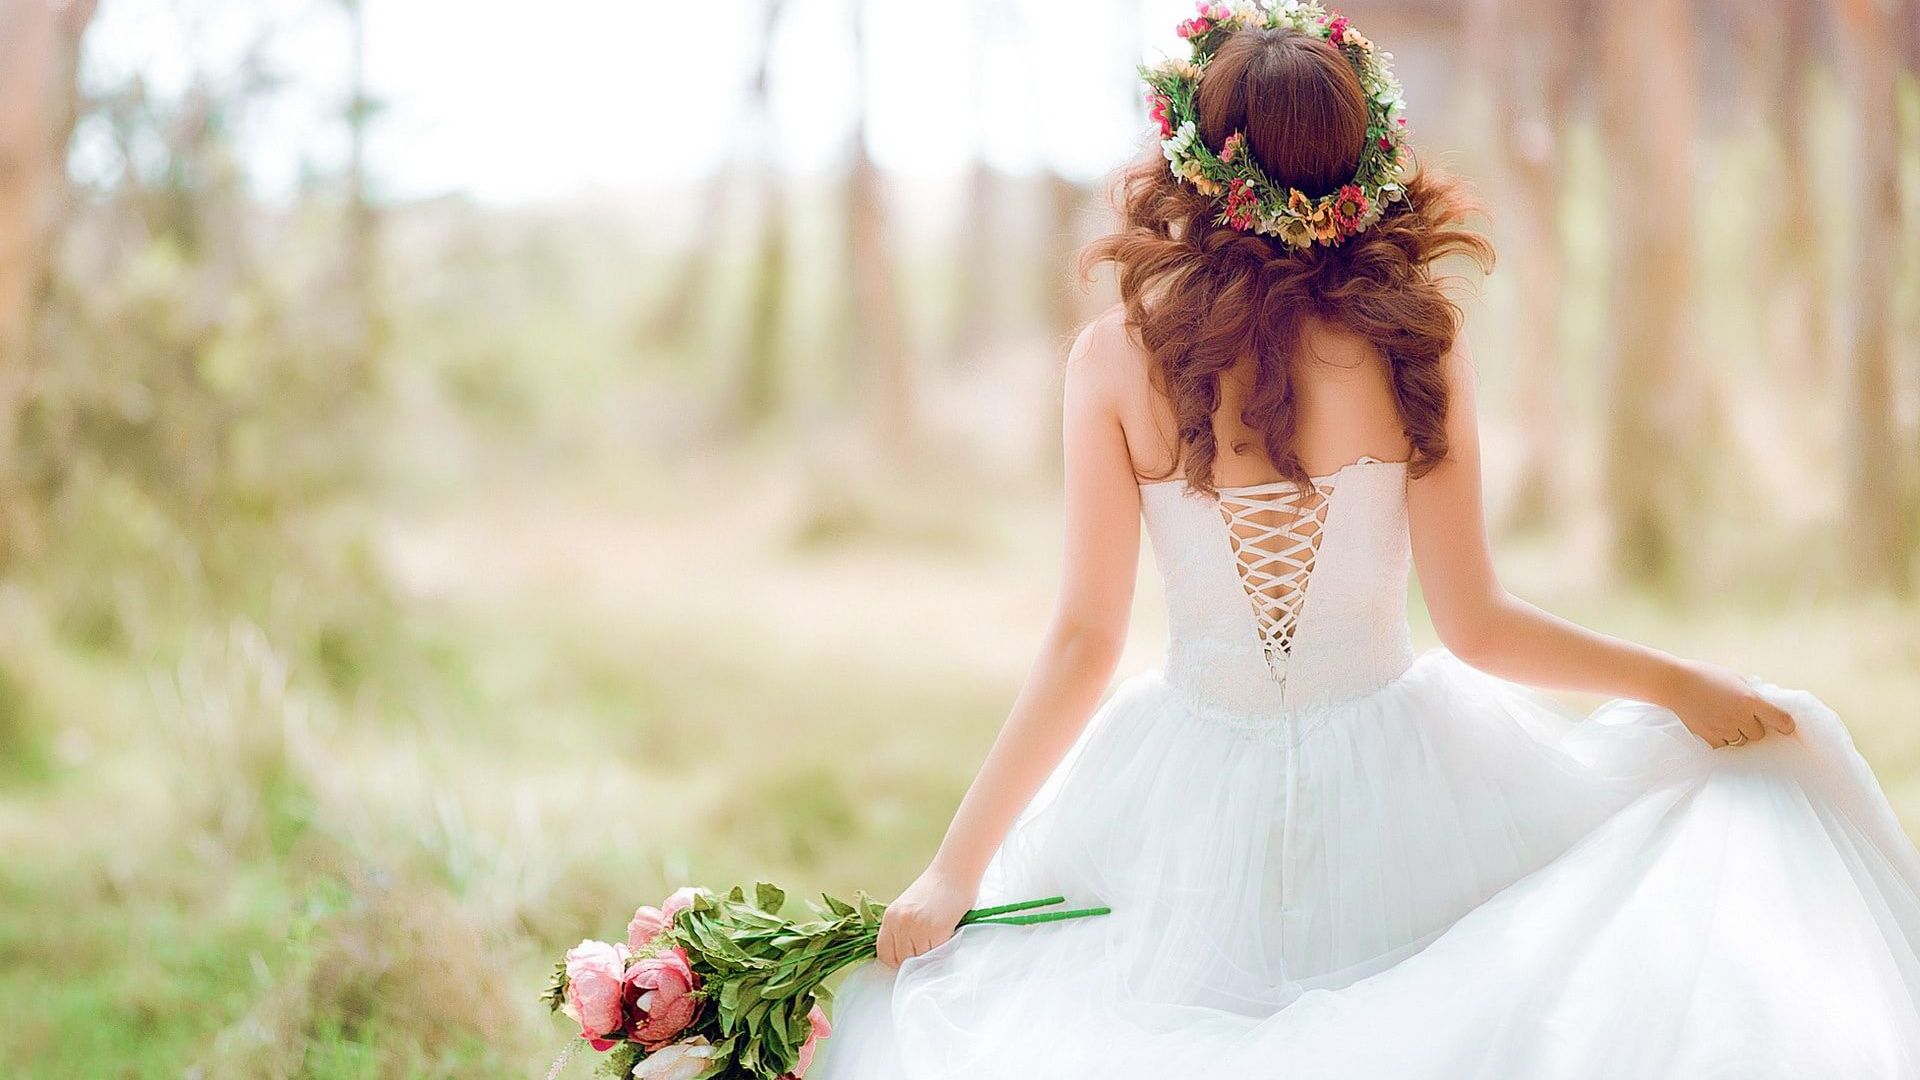 How To Pose For Your Wedding Photos - Tips For Looking Natural And Comfortable In Your Wedding Photos